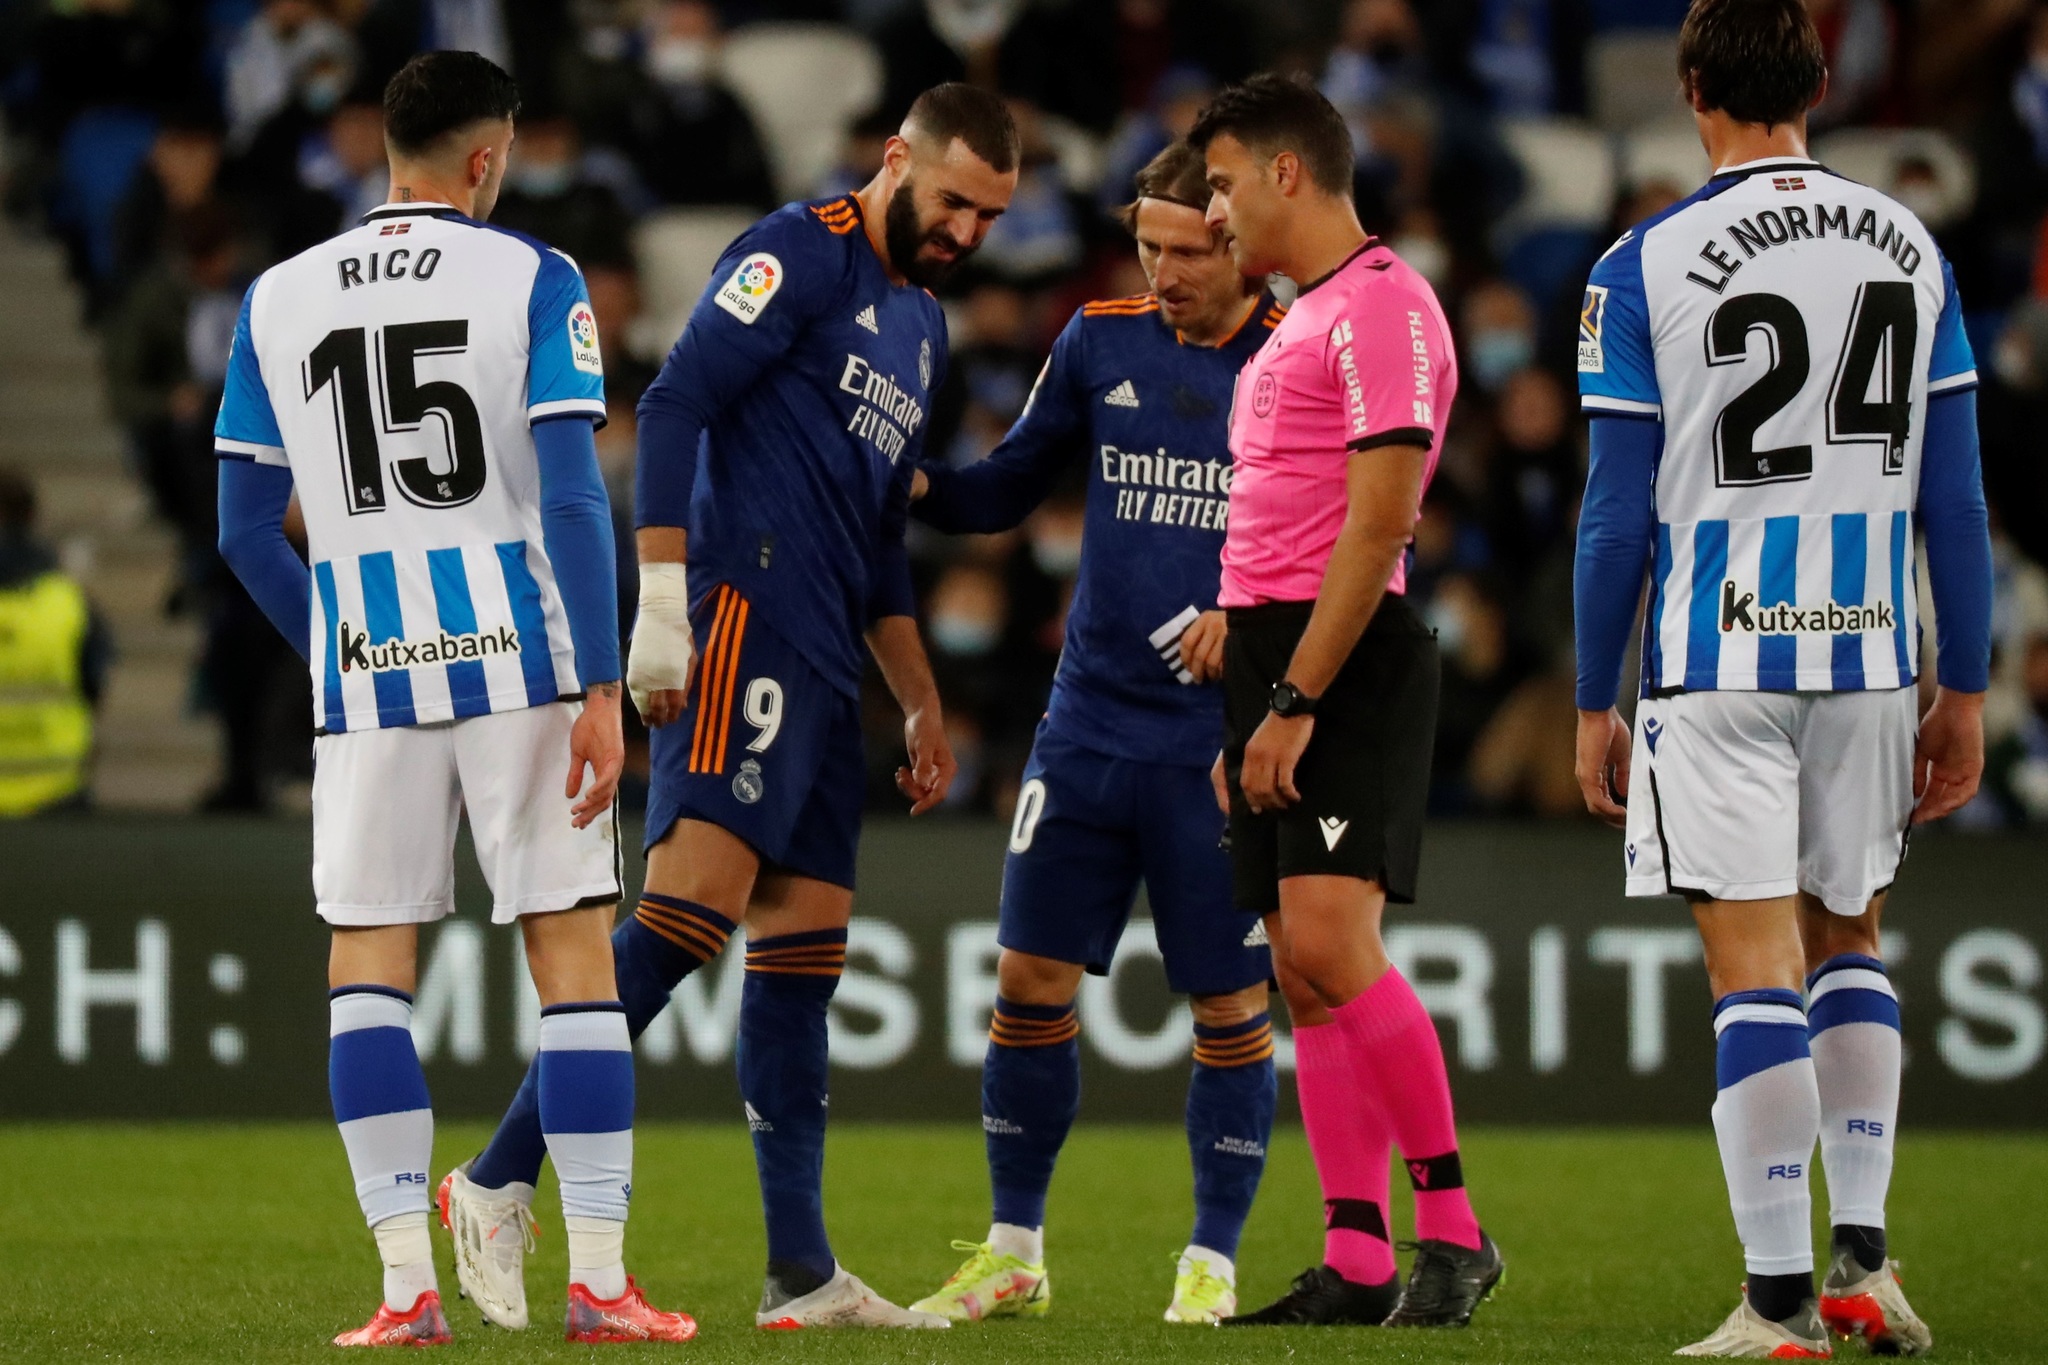 Karim Benzema suffers an injury during Real Madrid's match away at Real Sociedad.